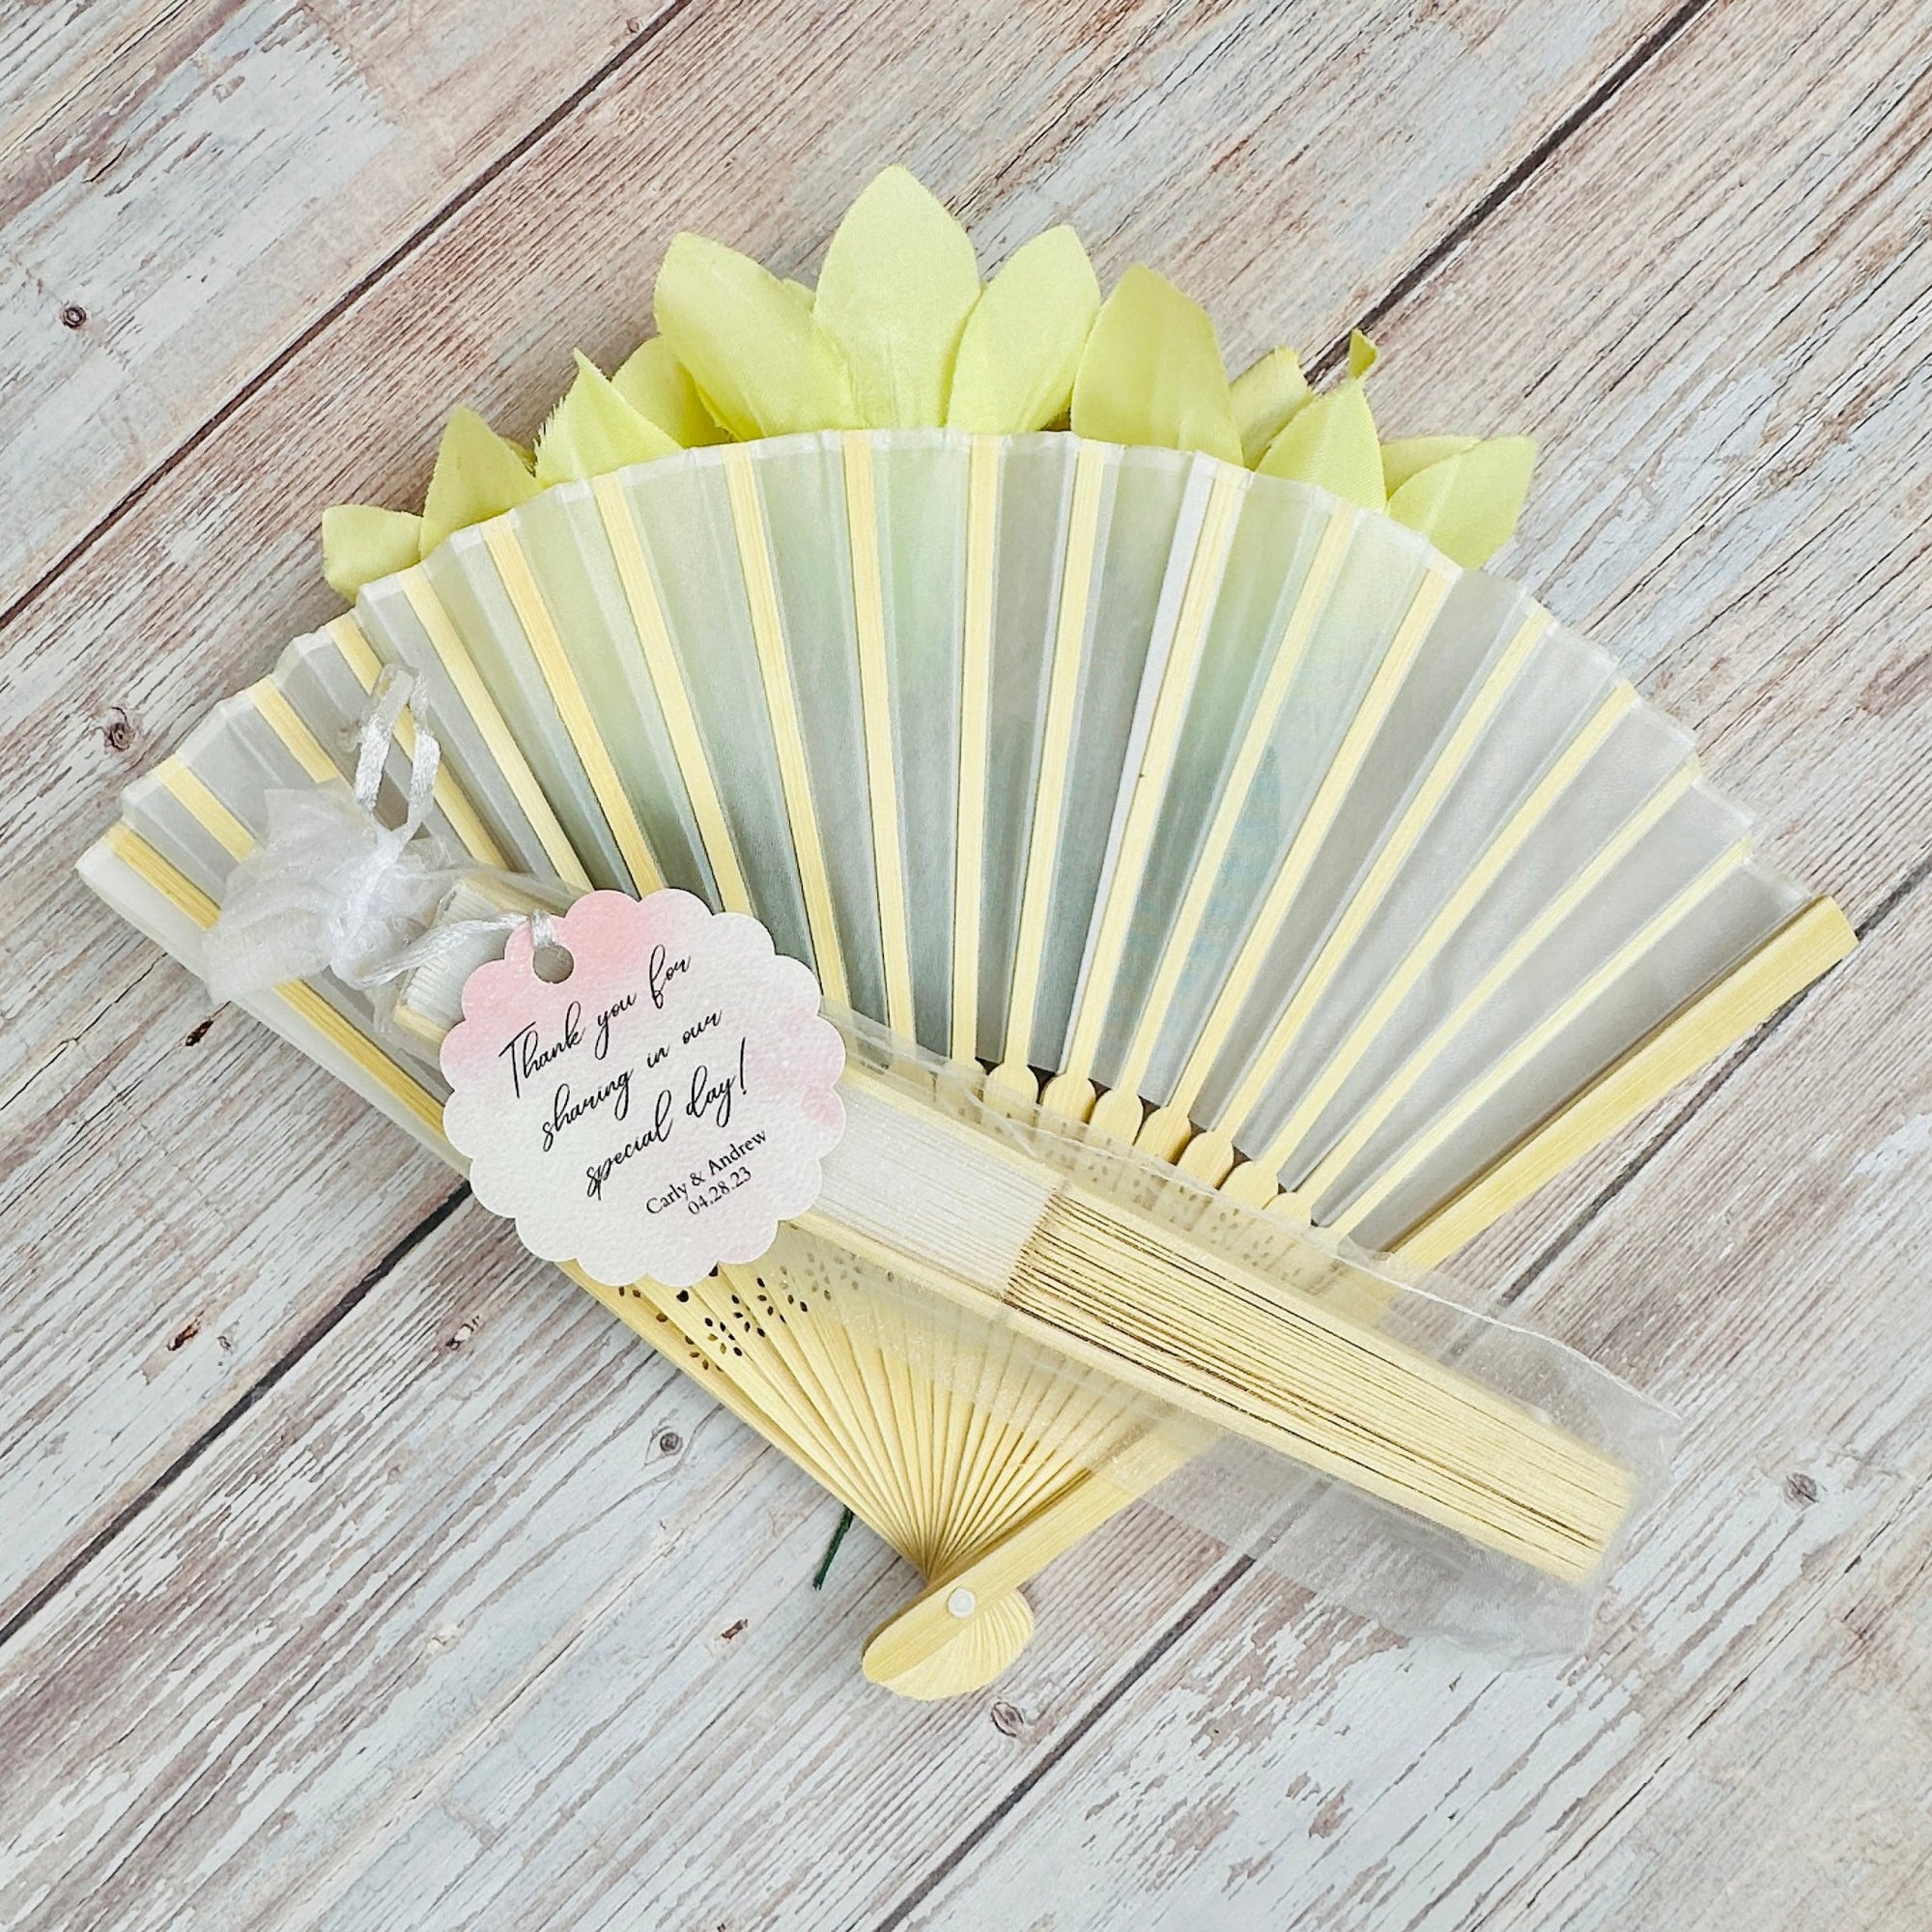  Fulmoon 100 Set Thank You Hand Fans for Wedding Guests